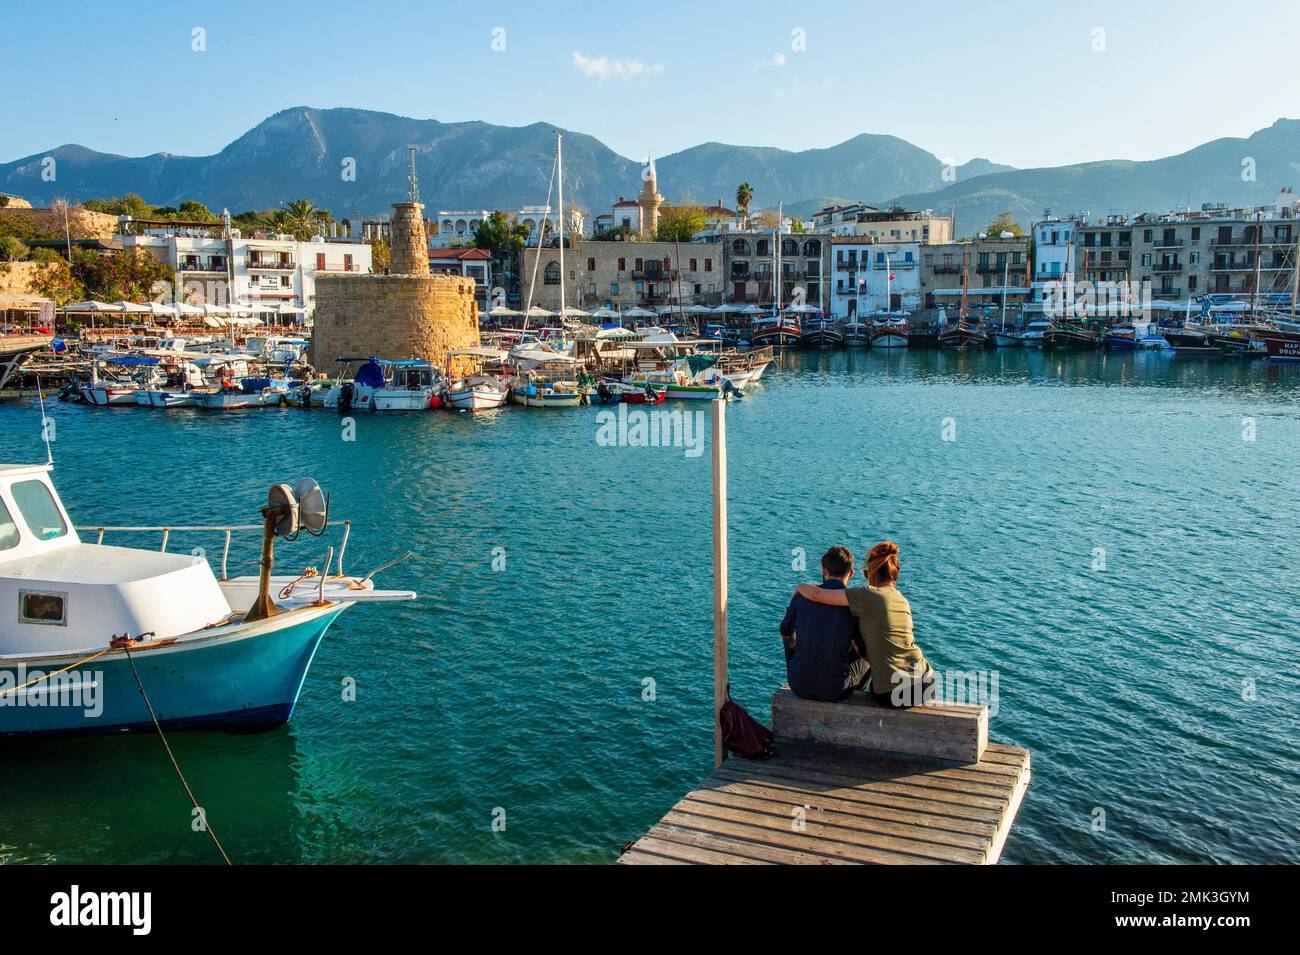 A couple sits serenely overlooking the harbor of Keryneia / Girne Stock Photo